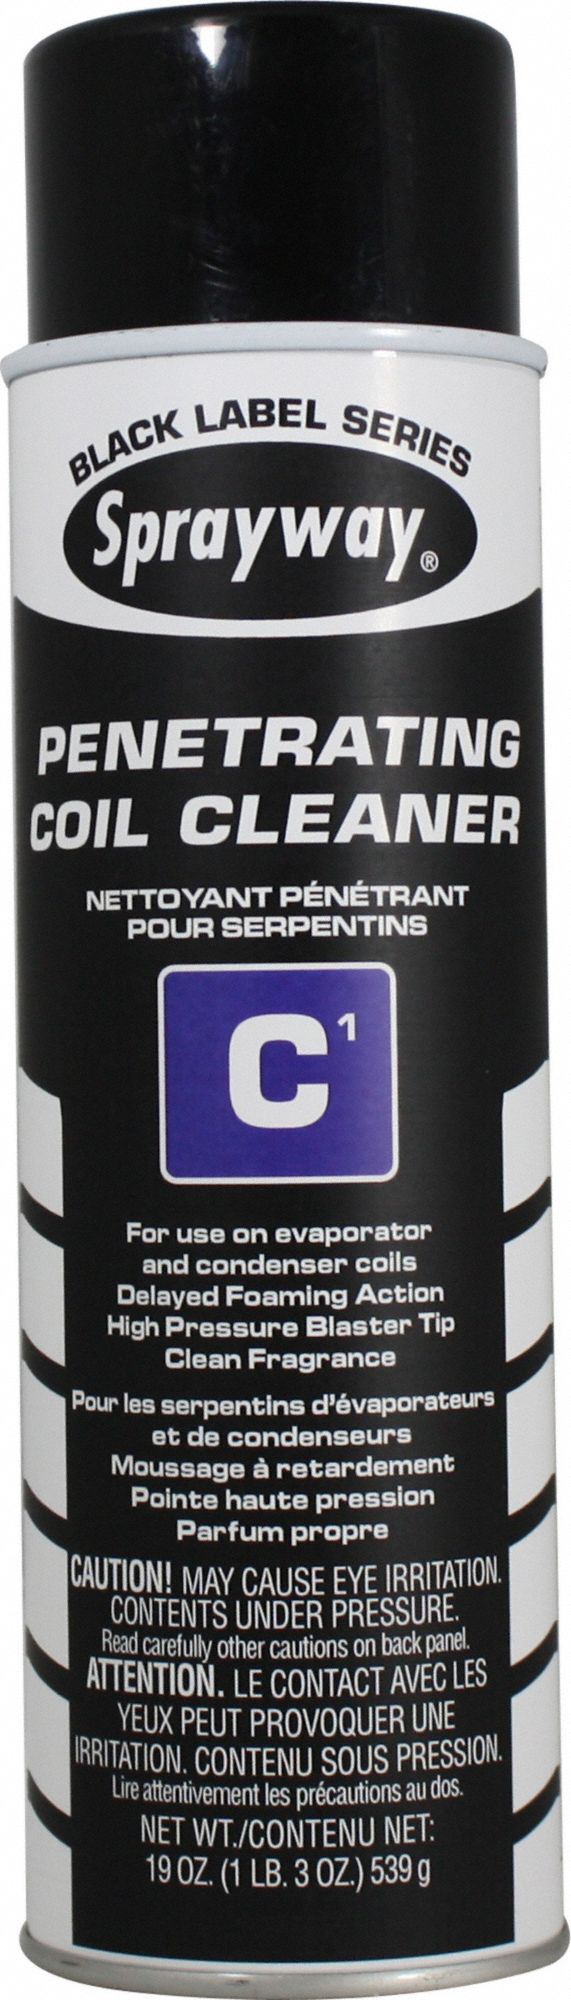 Pentrating Coil Cleaner: 20 oz Size, Clear